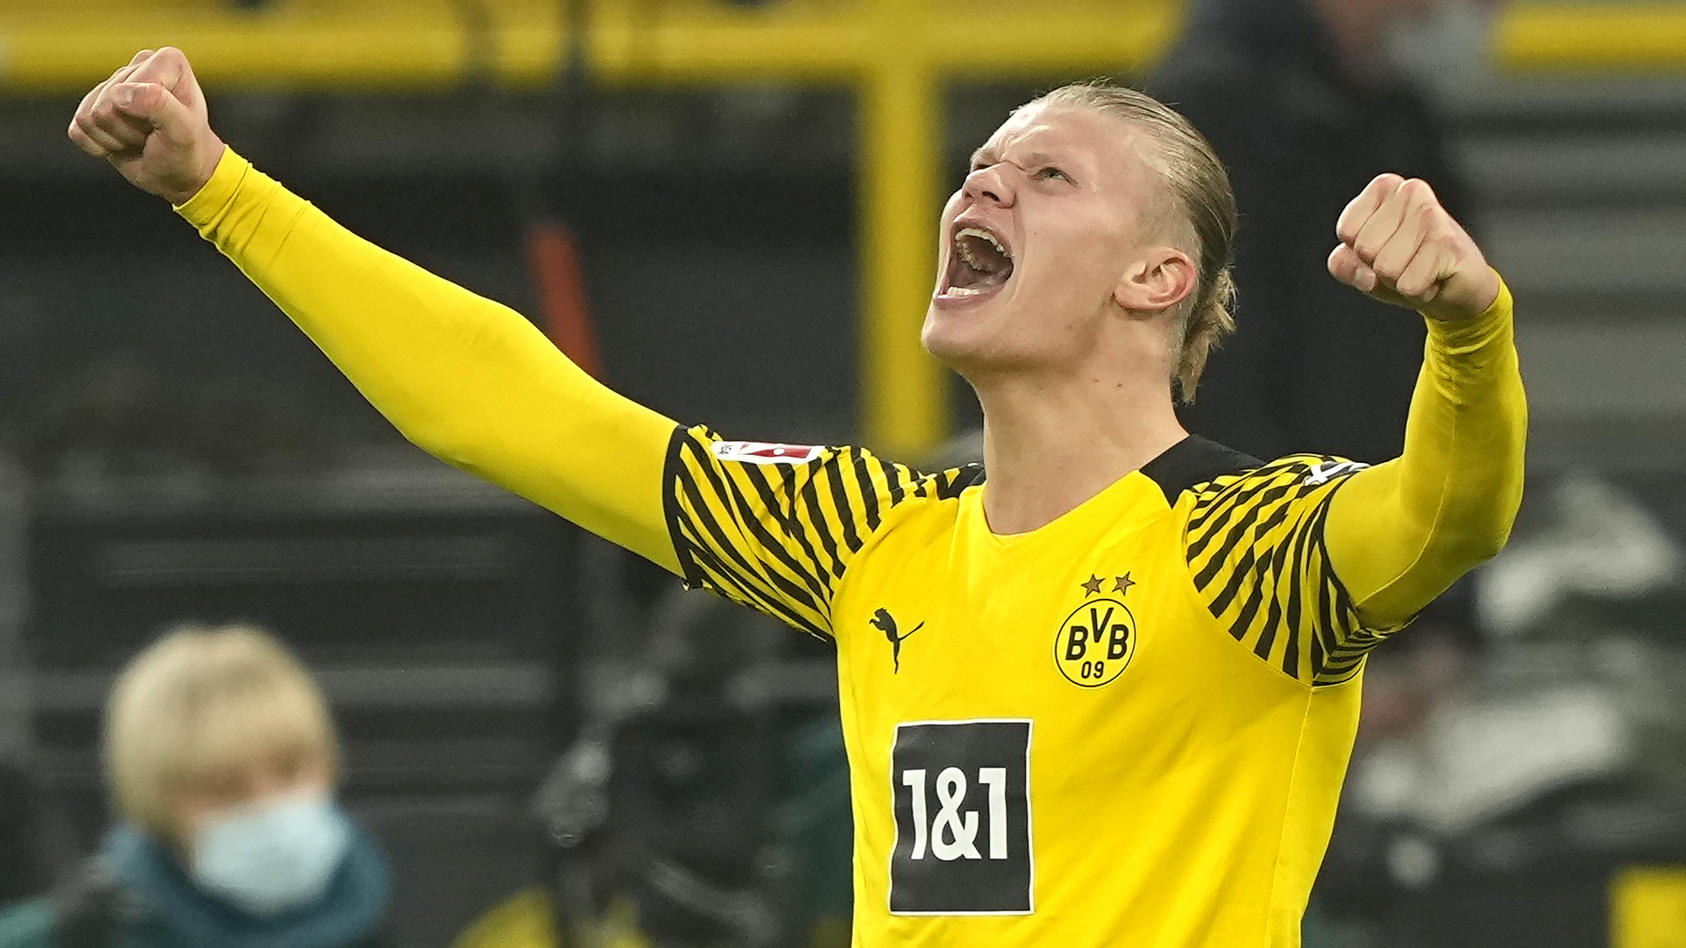 FILE - Dortmund's Erling Haaland celebrates the fourth goal of his team against Freiburg during the German Bundesliga soccer match between Borussia Dortmund and SC Freiburg in Dortmund, Germany, Friday, Jan. 14, 2022. Erling Haaland looks sure to be 